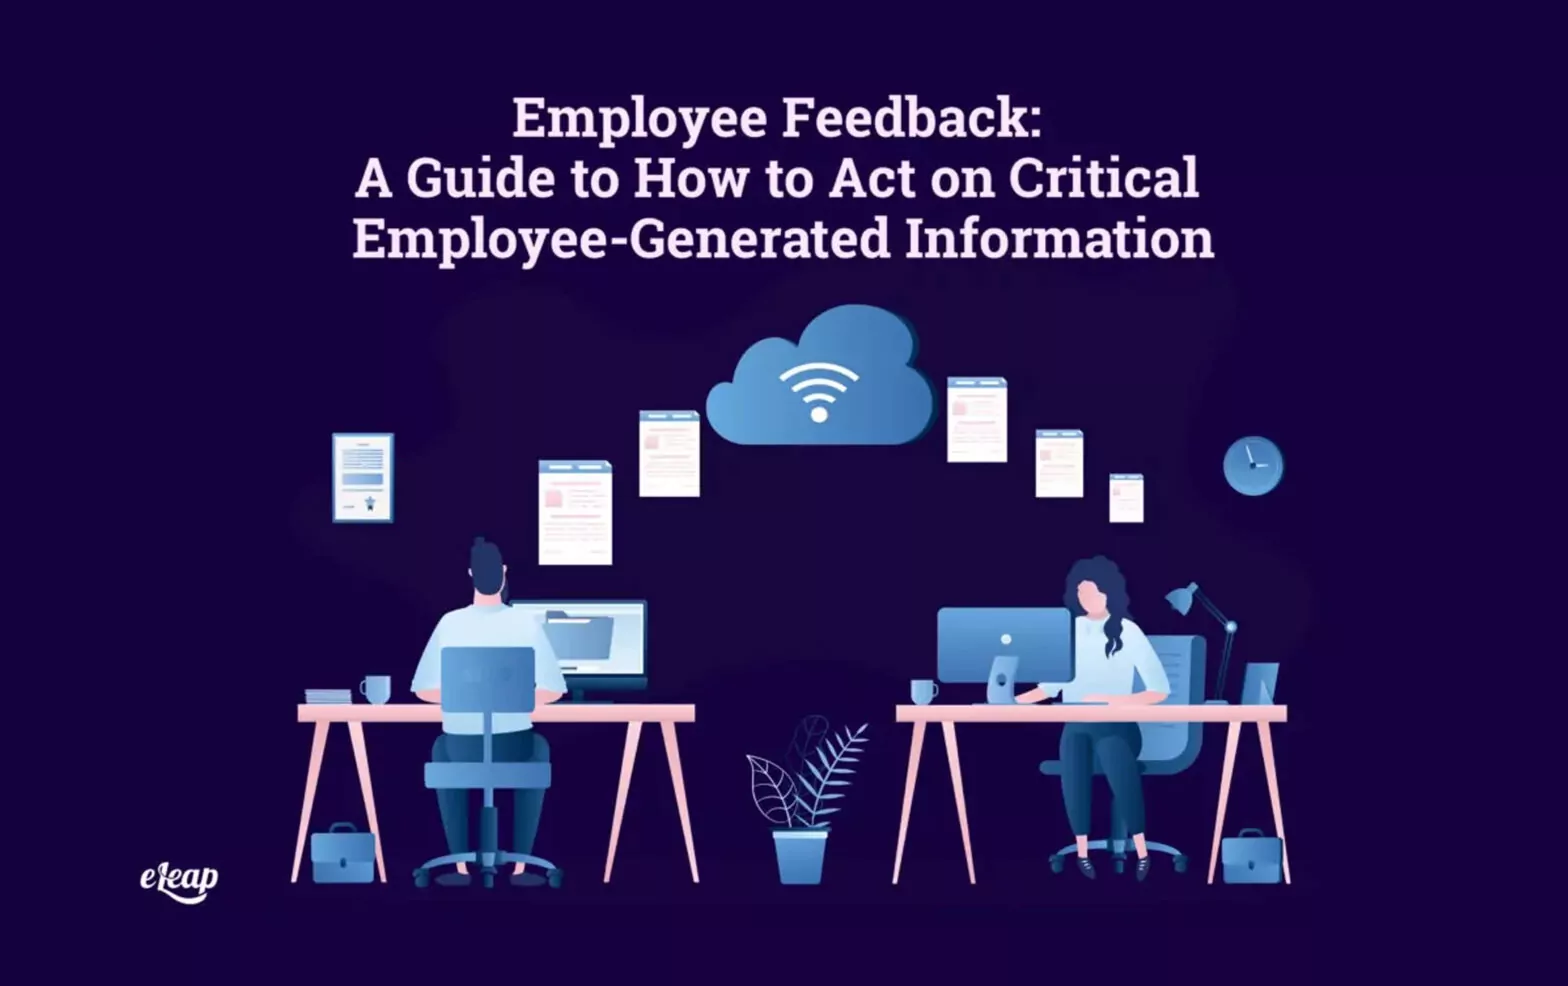 Employee Feedback: A Guide to How to Act on Critical Employee-Generated Information